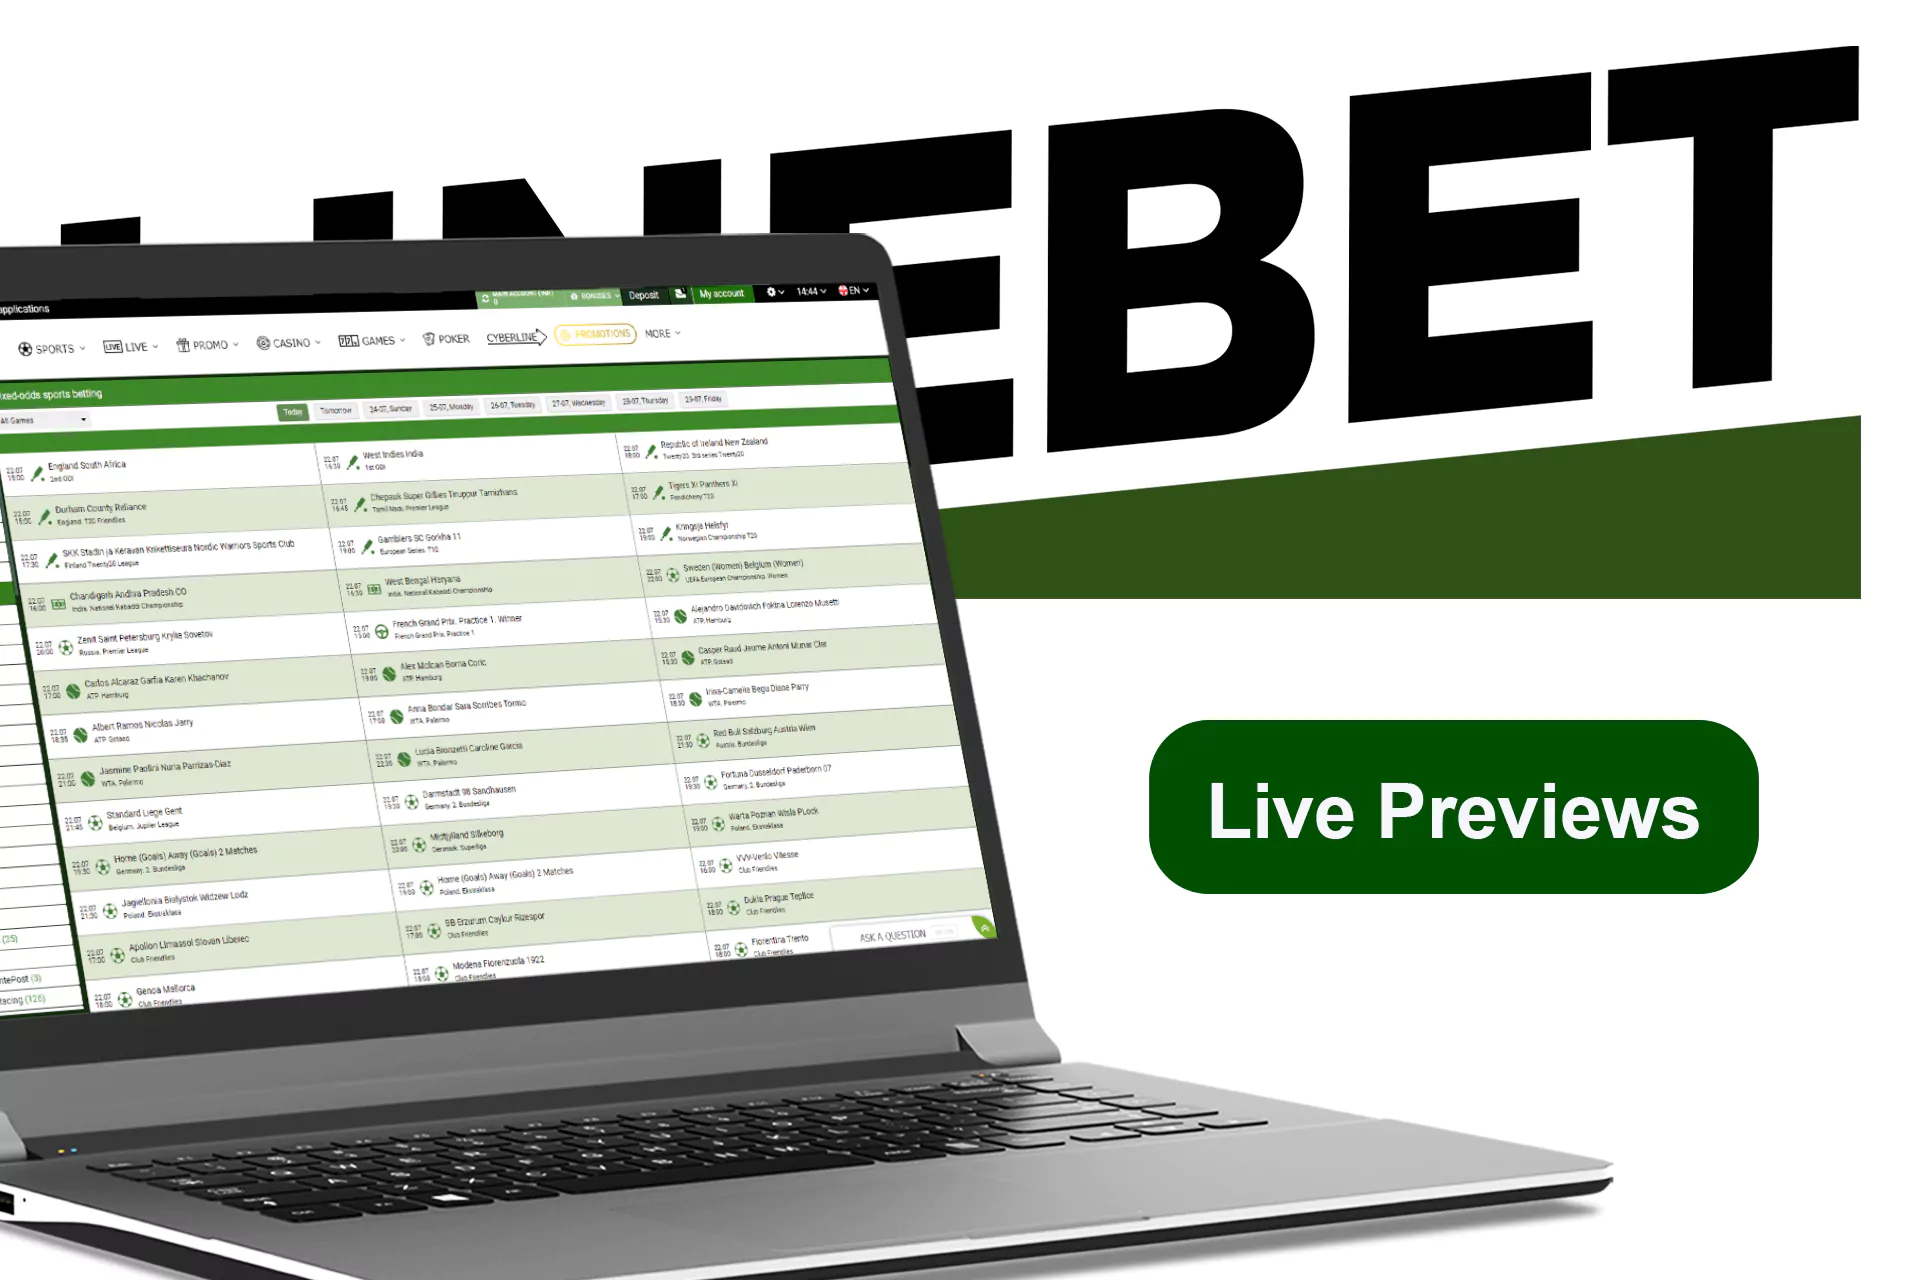 Live Preview is a type of bet that is placed before a game on upcoming occurrences.